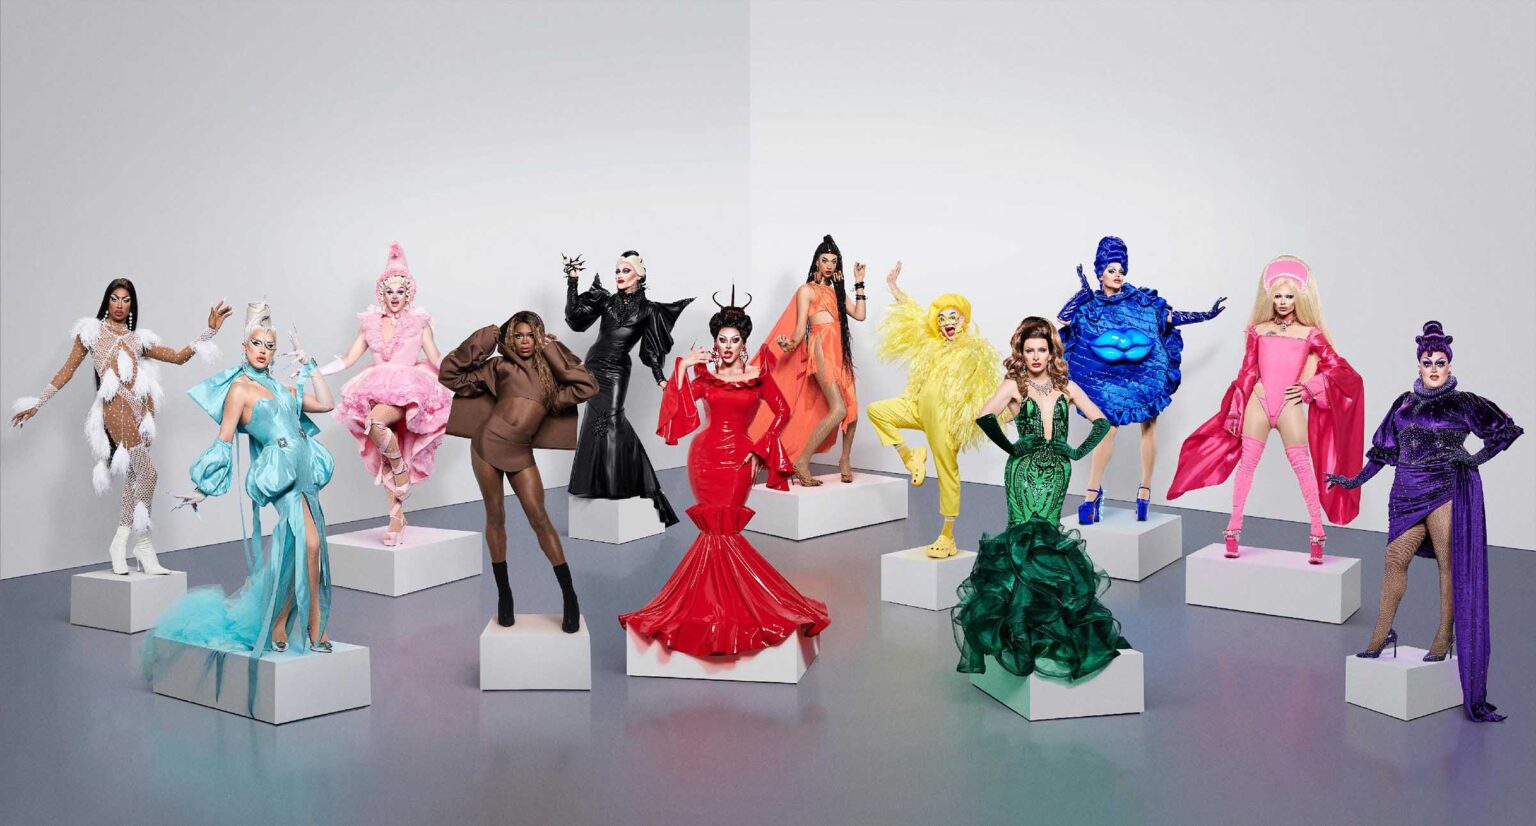 It's time to get to werk ladies! 'Drag Race UK' has returned to WOWPresents Plus. See what went down in the season 2 premiere and who's not making the cut.